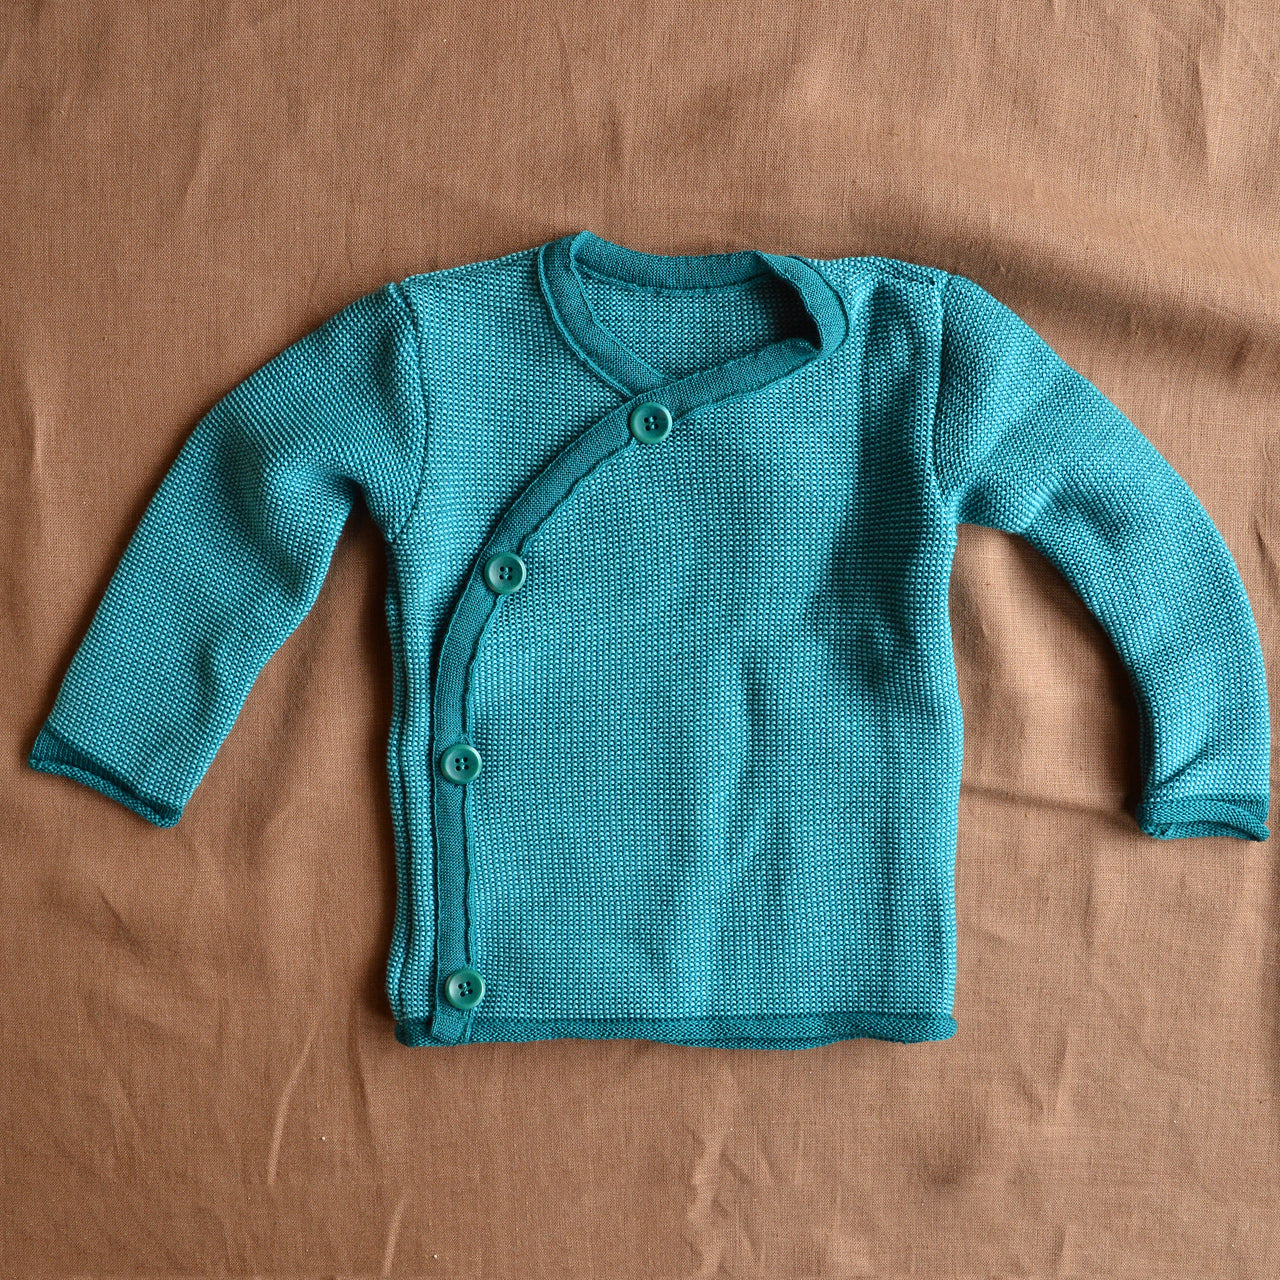 Merino Baby Jacket - Pacific/Teal (0-24m) *Retired Colour*